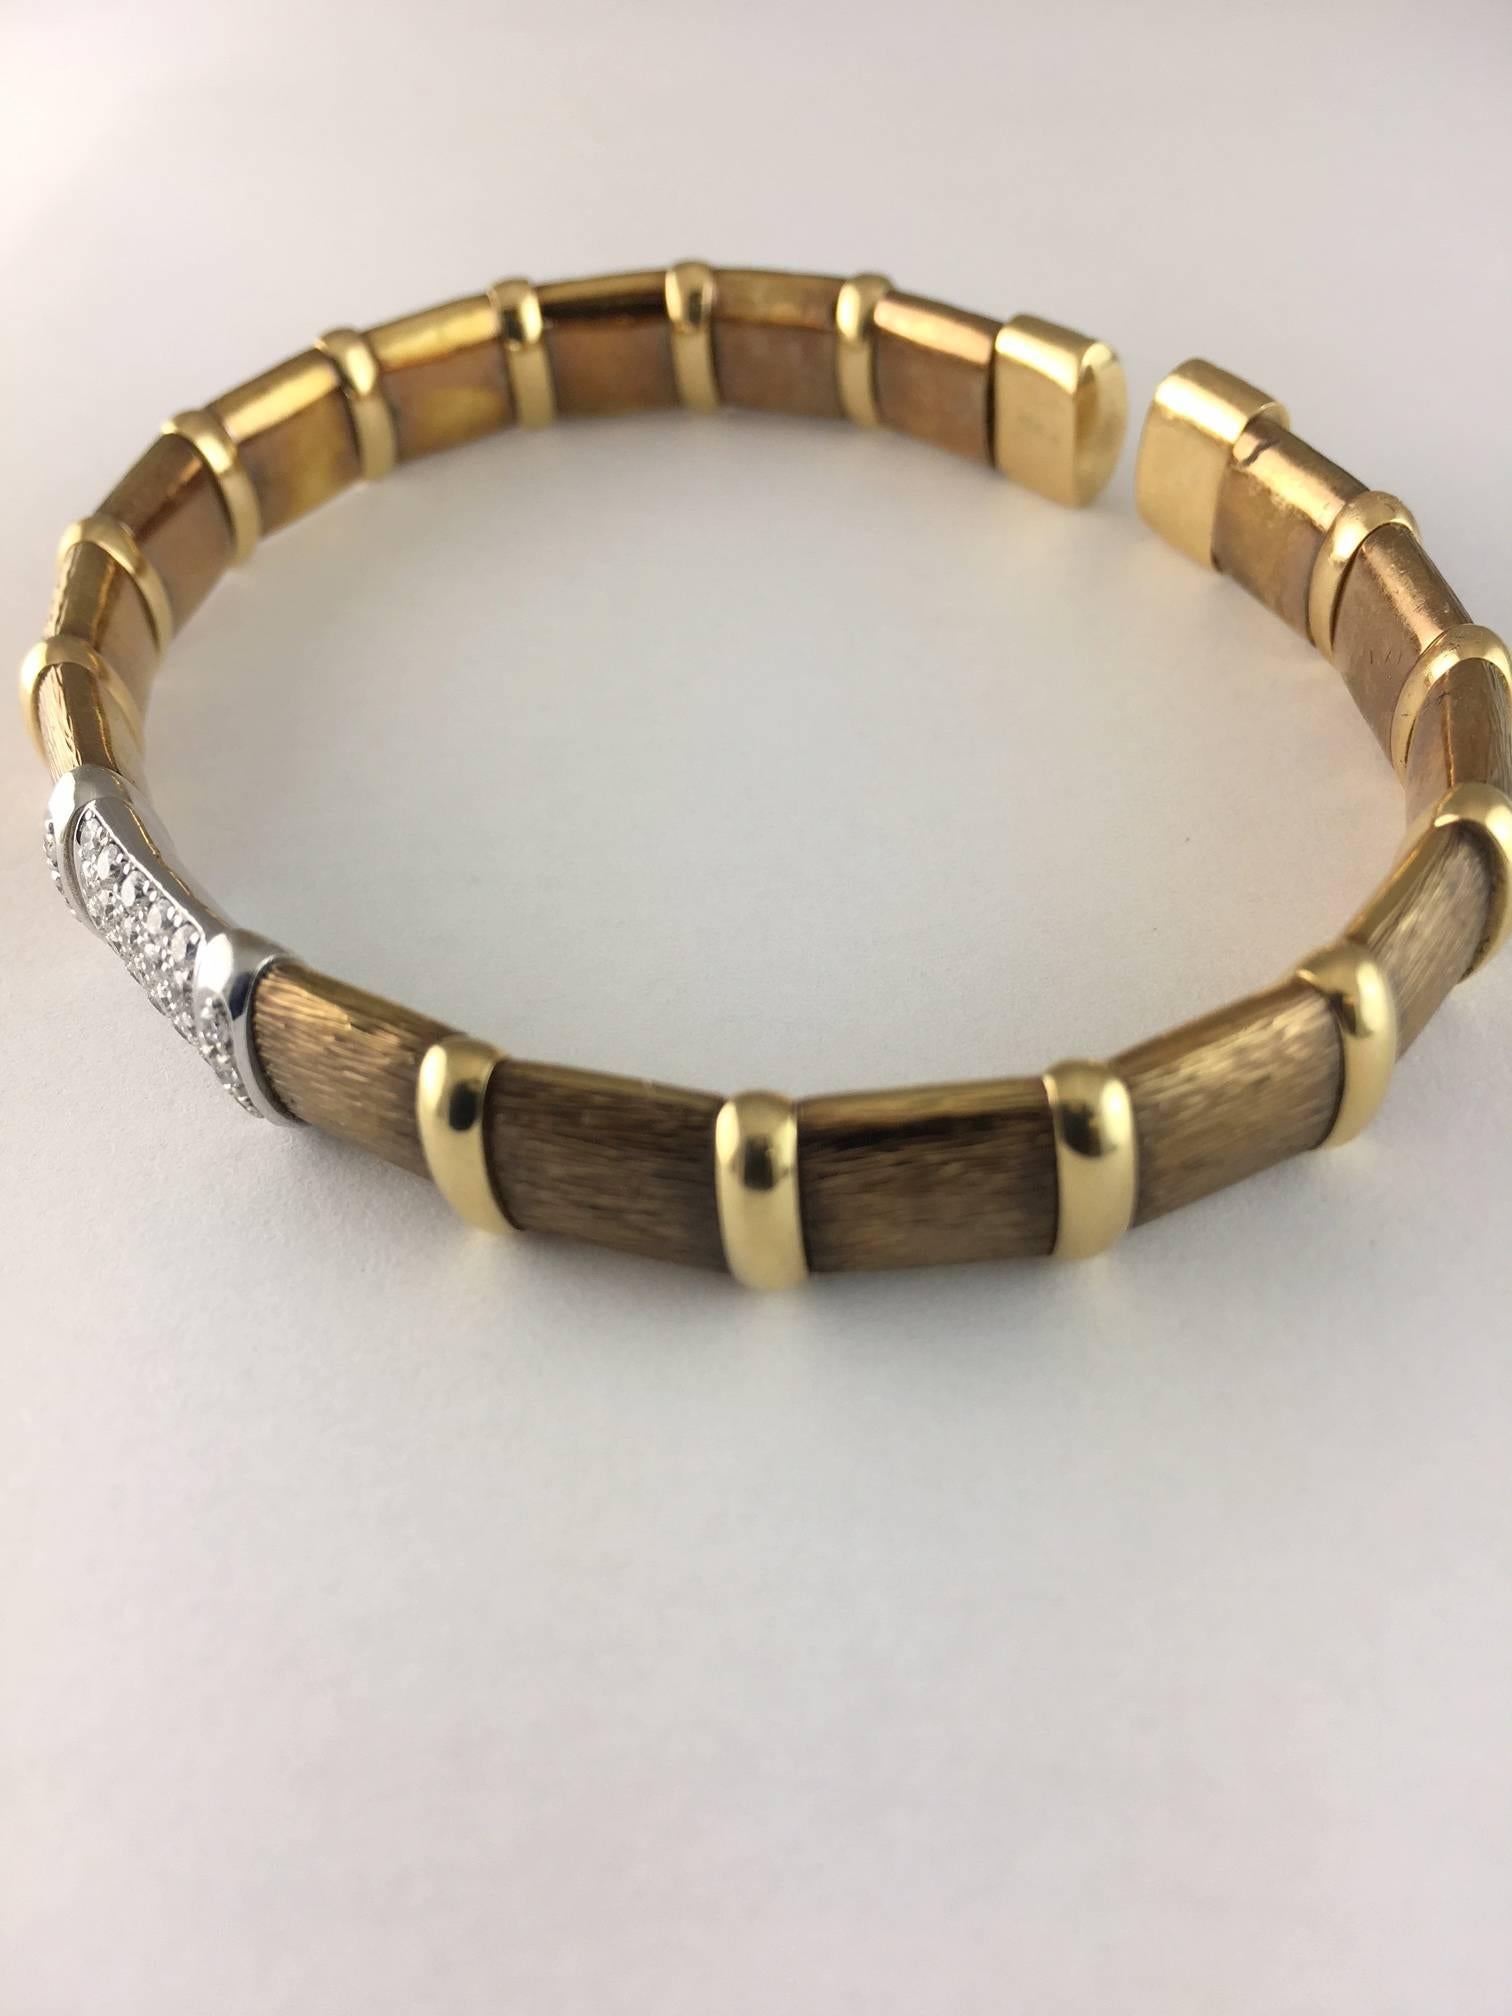 Italian Craftsmanship-18k Chocolate Gold Bracelet with .49cts diamonds.  Fits 7-7.5 inch wrist.   From Lecil Henderson Collection.